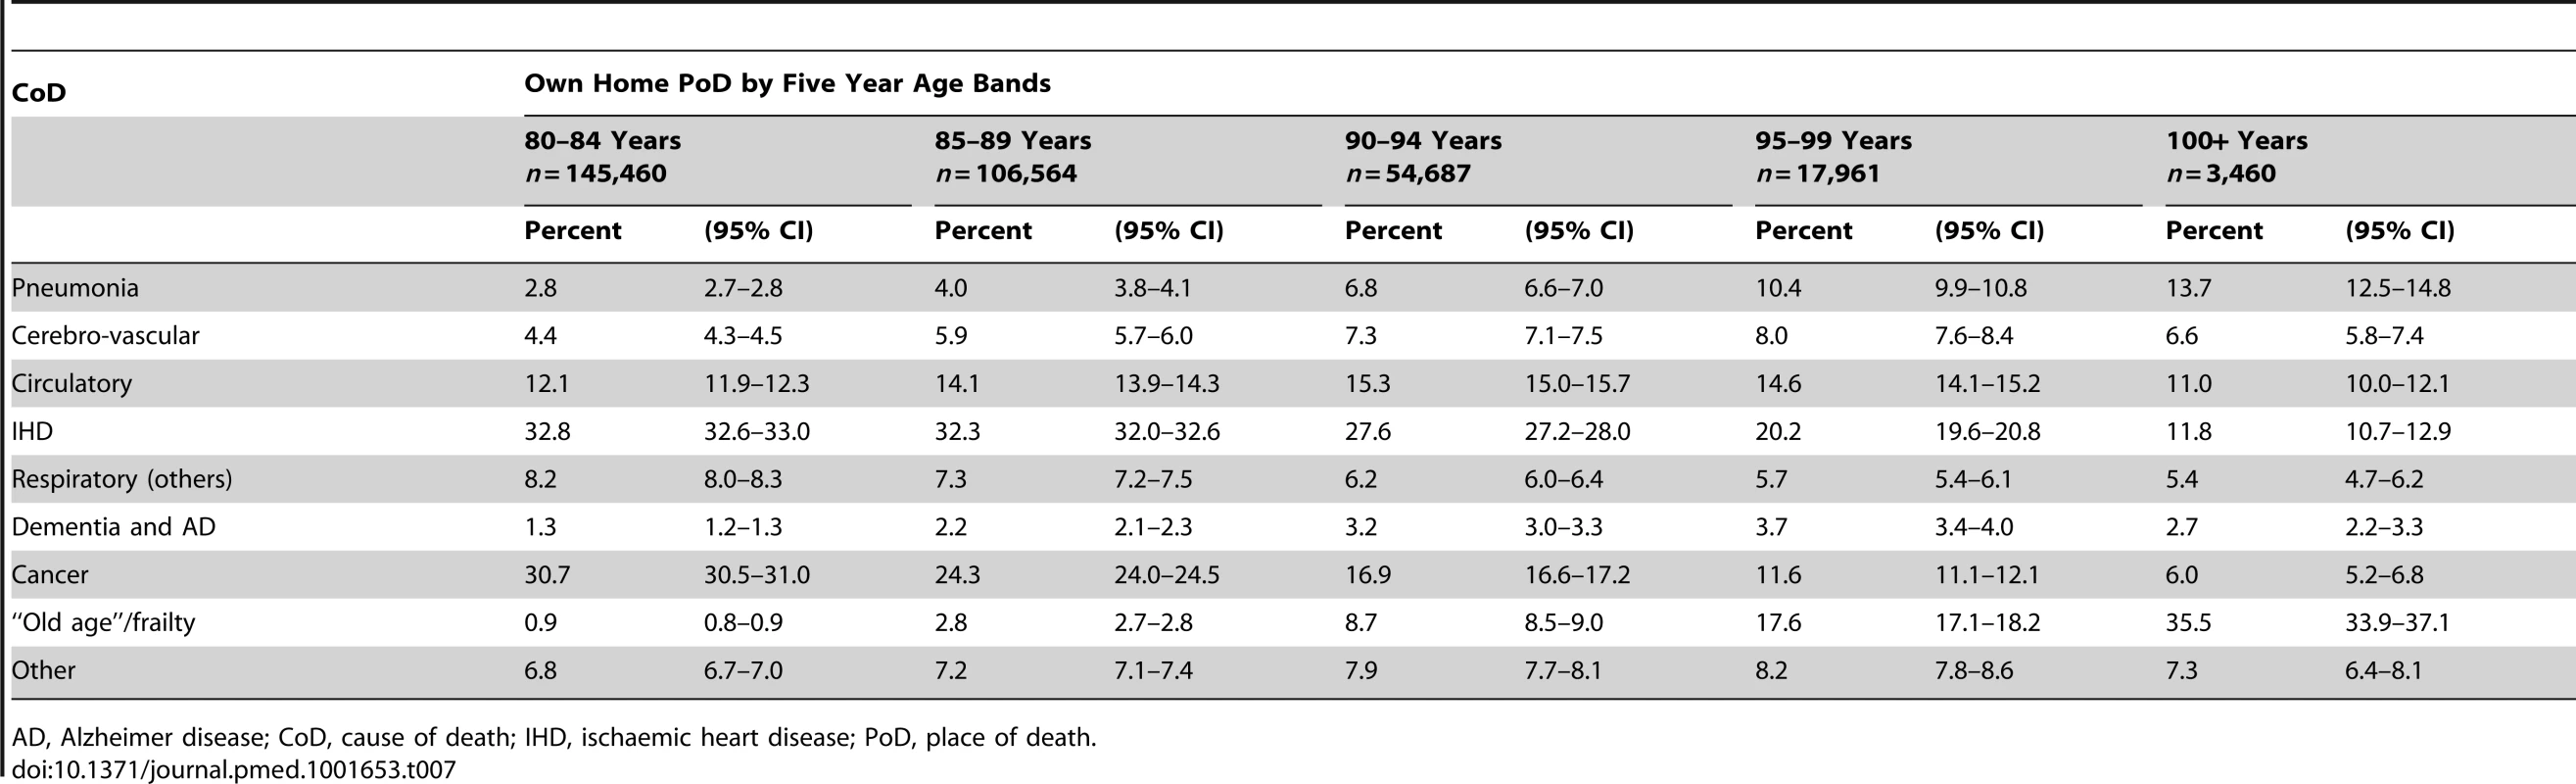 Cause of death by age bands and own home as place of death.